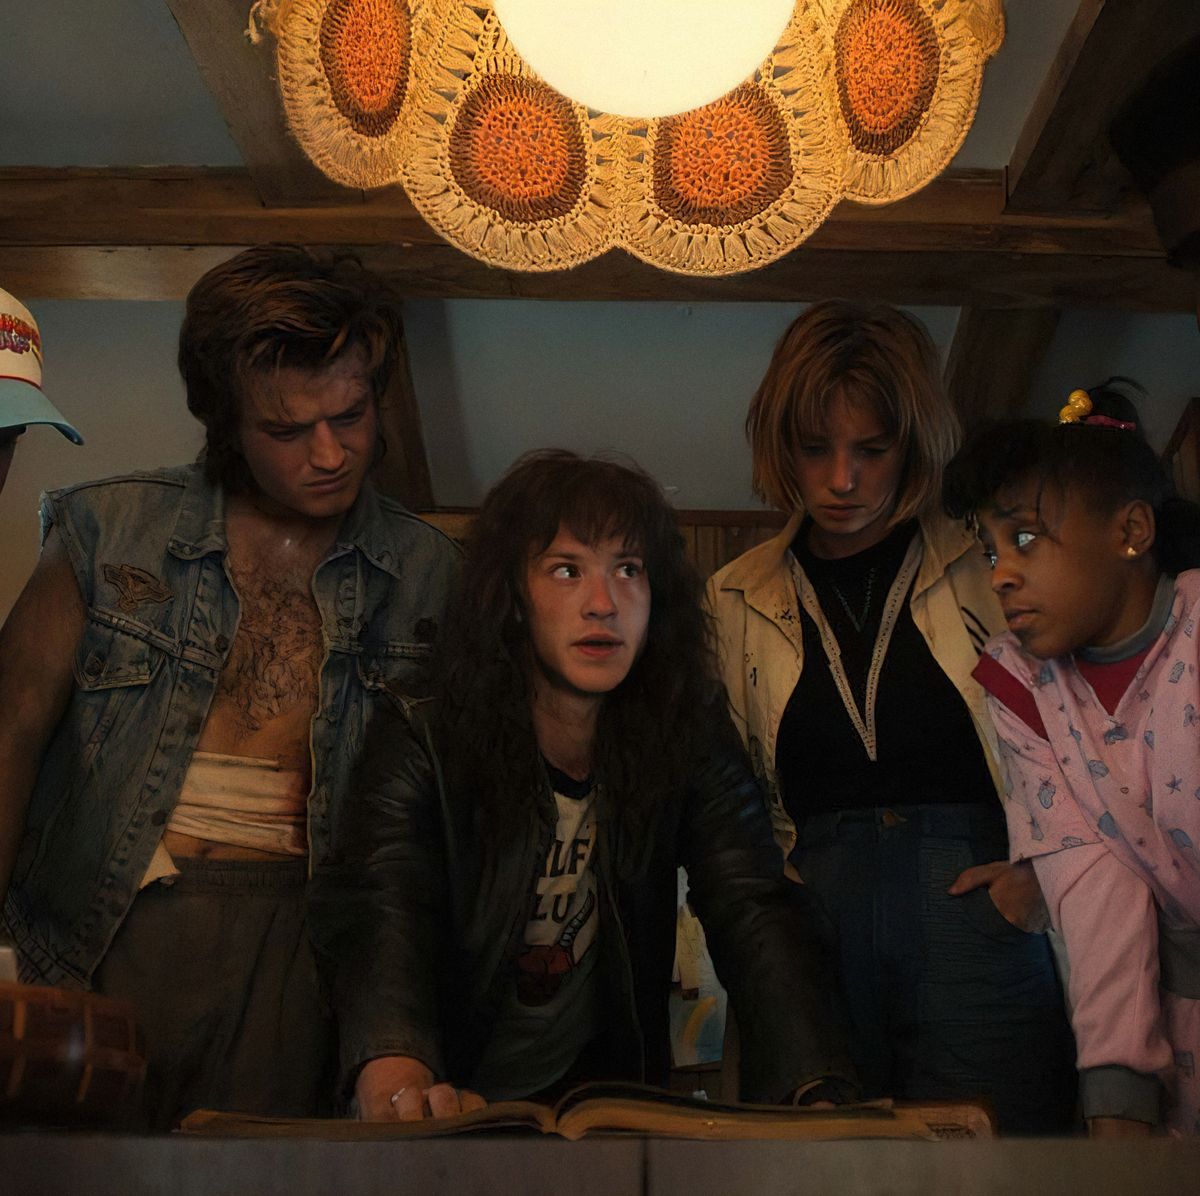 Film Updates on X: 'Stranger Things 4' will be released in two parts:  Volume 1 on May 27 and Volume 2 on July 1.  / X